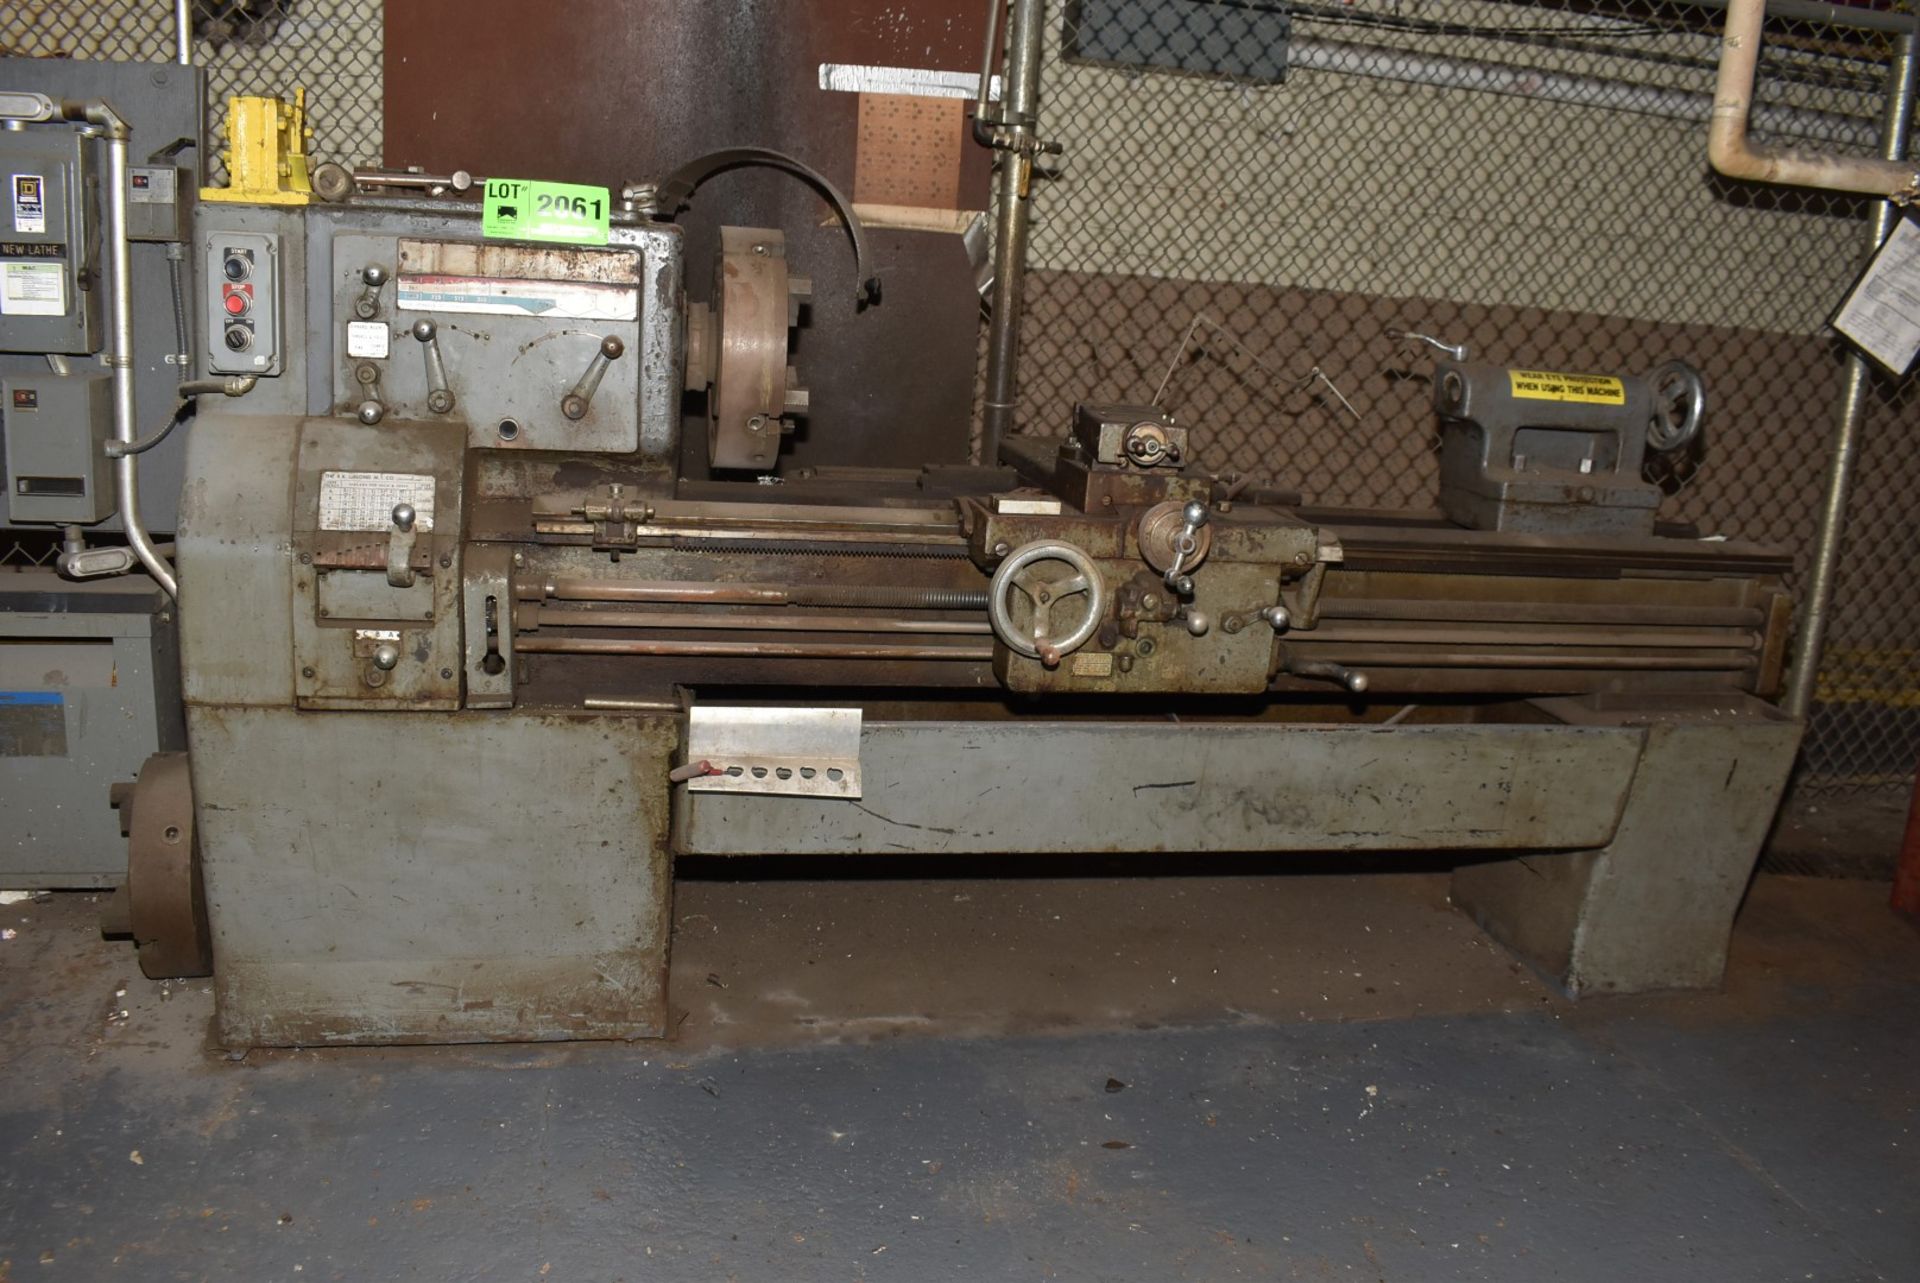 LEBLOND RK ENGINE LATHE WITH 22" SWING, 60" BETWEEN CENTERS, 12" 4-JAW CHUCK, SPEEDS TO 1000 RPM, - Image 2 of 6